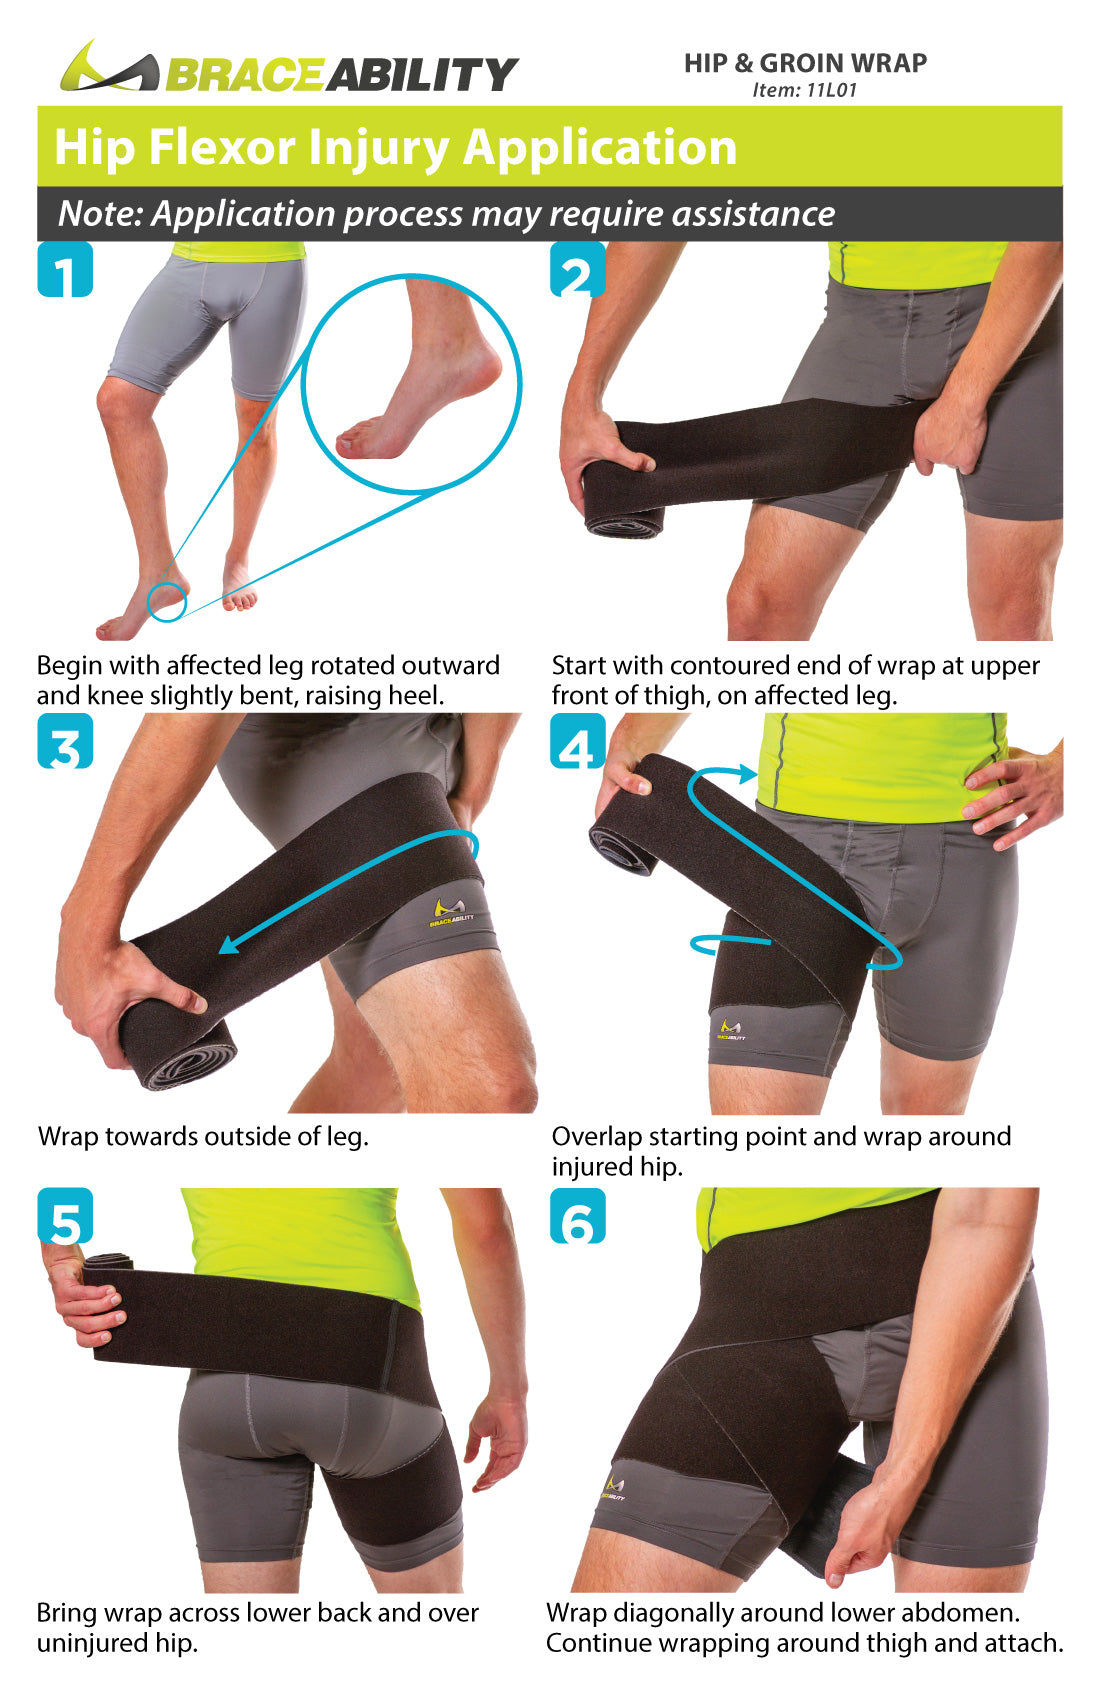 How to put on the hip and groin wrap instruction sheet